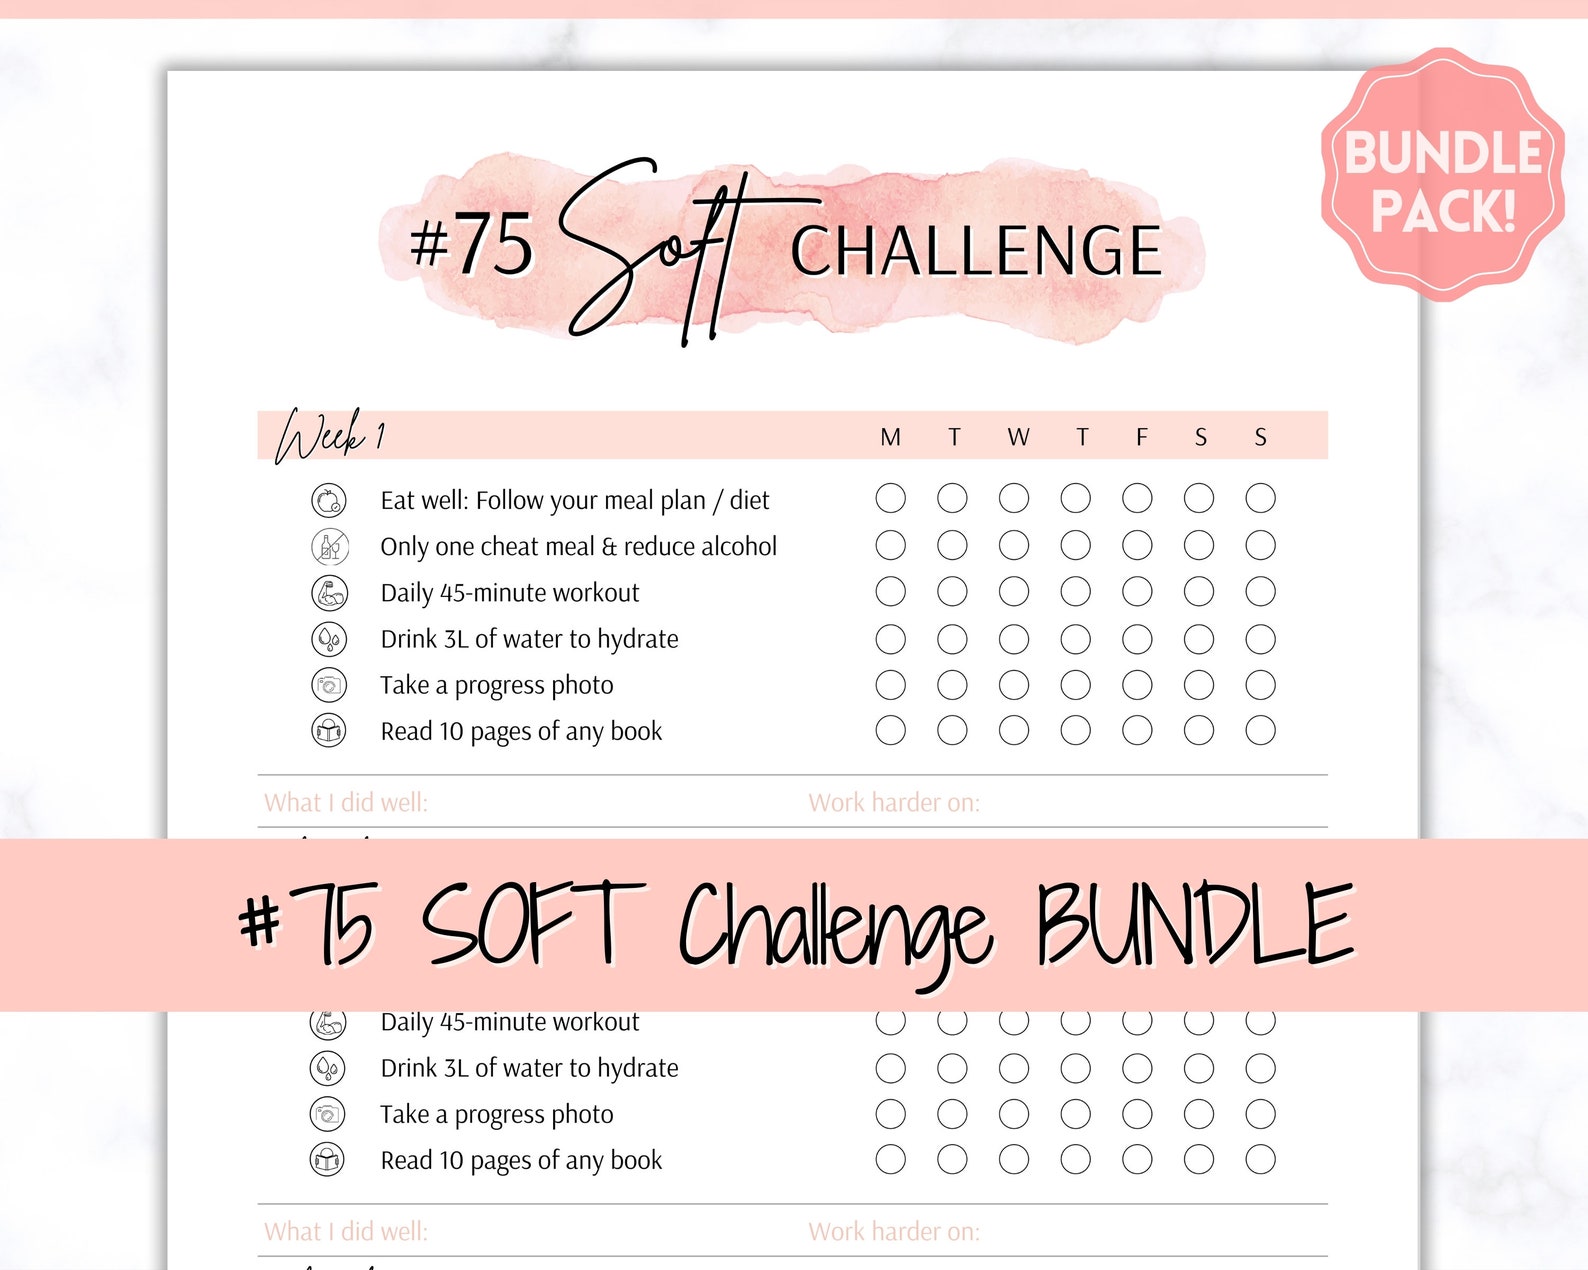 75-soft-challenge-tracker-easy-75-day-weekly-meal-planner-etsy